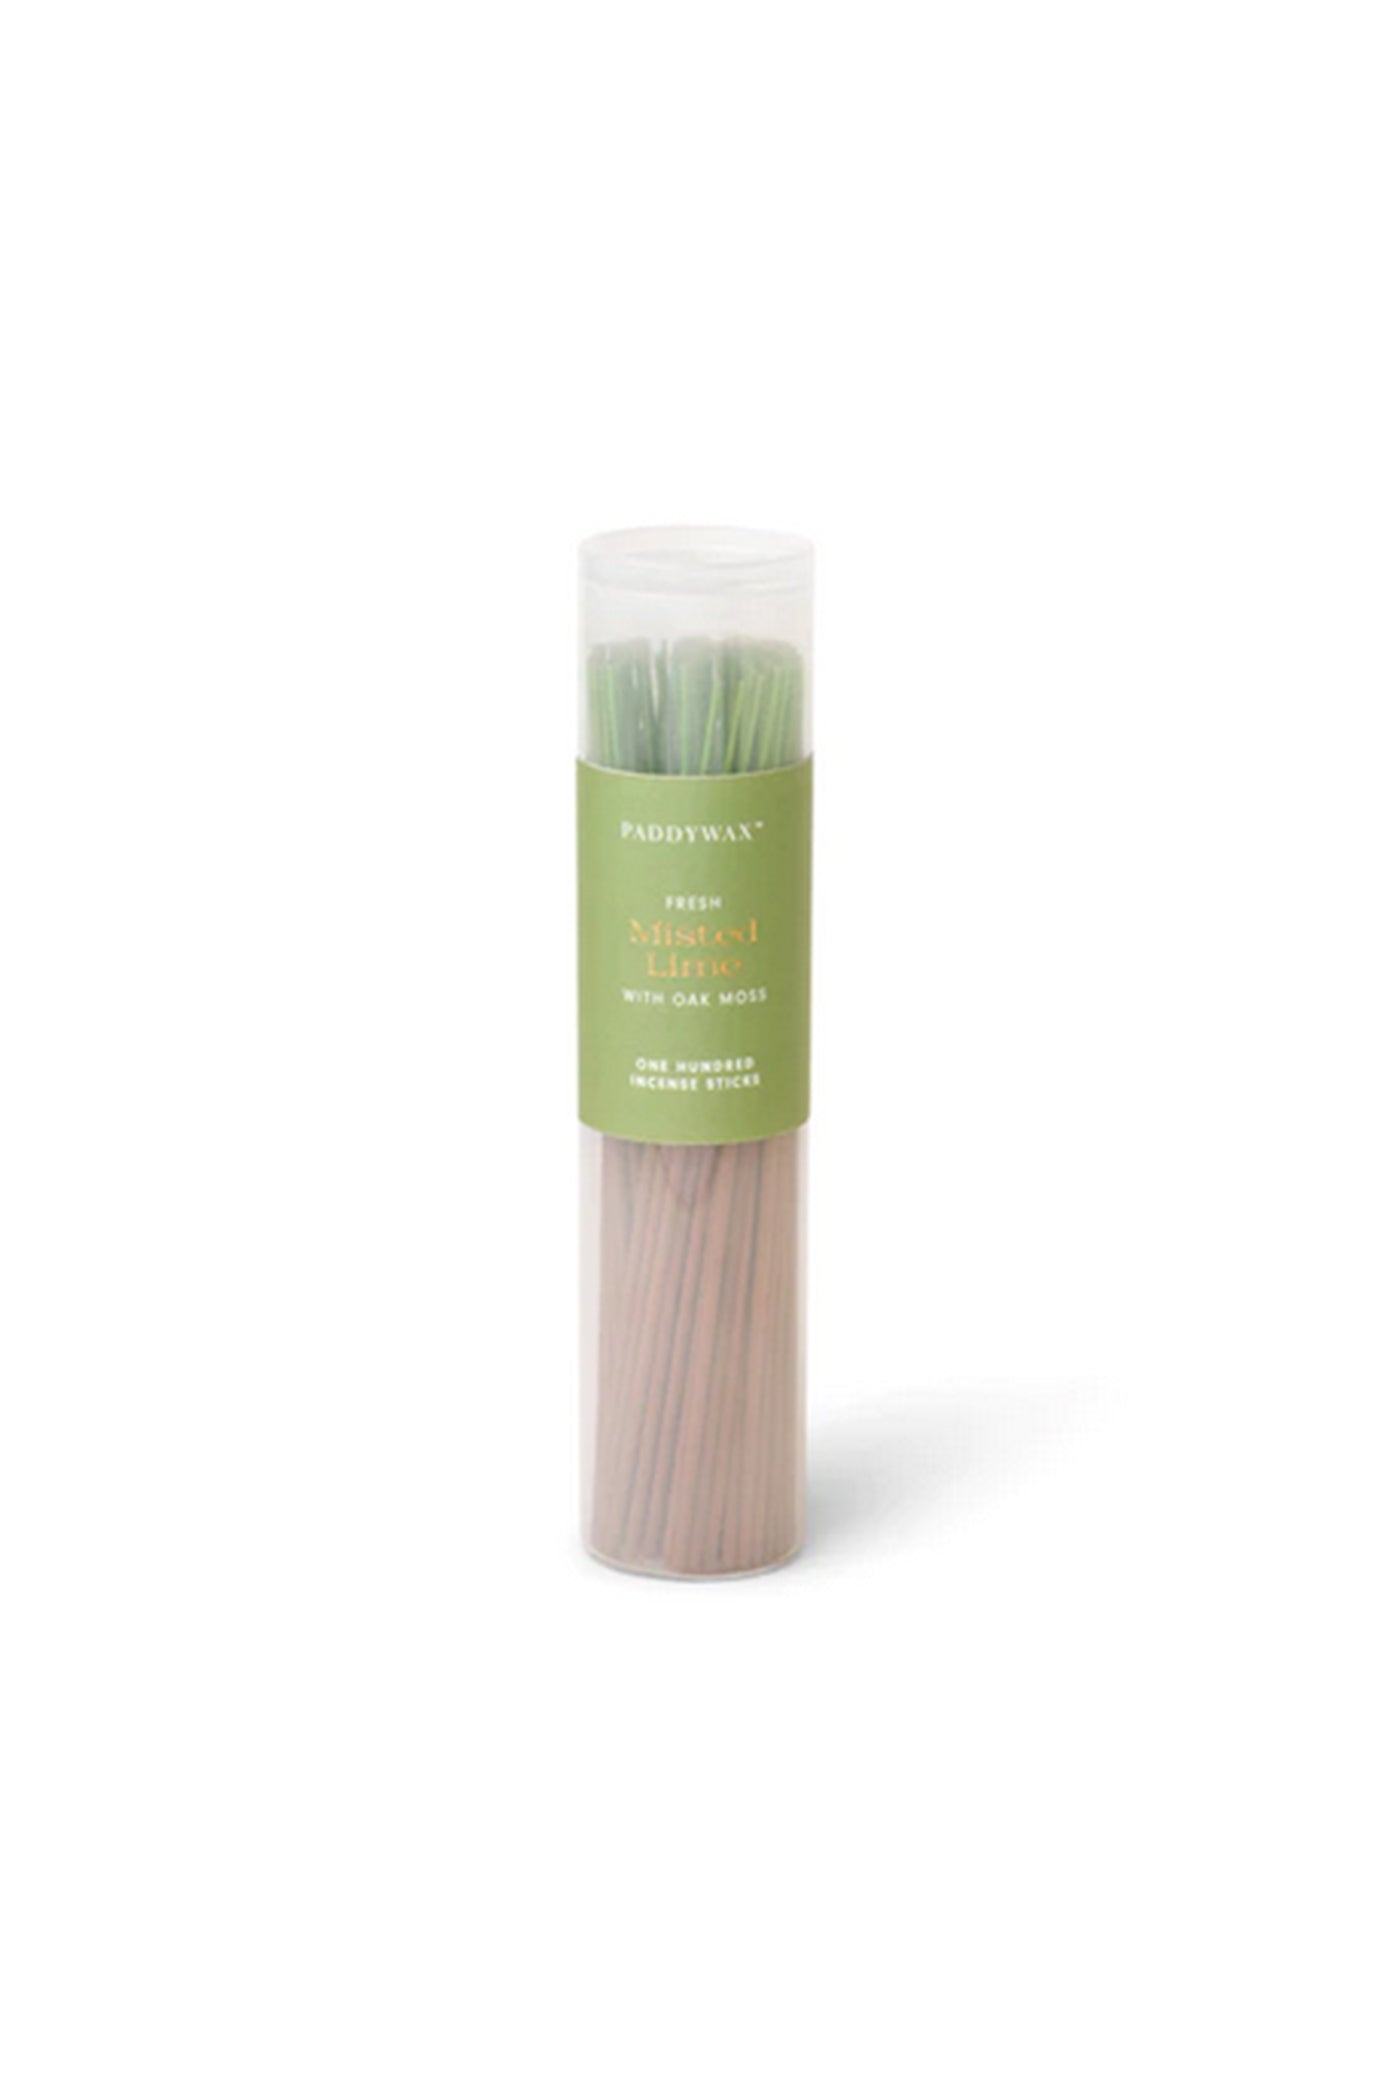 Incense Sticks - Misted Lime by Paddywax